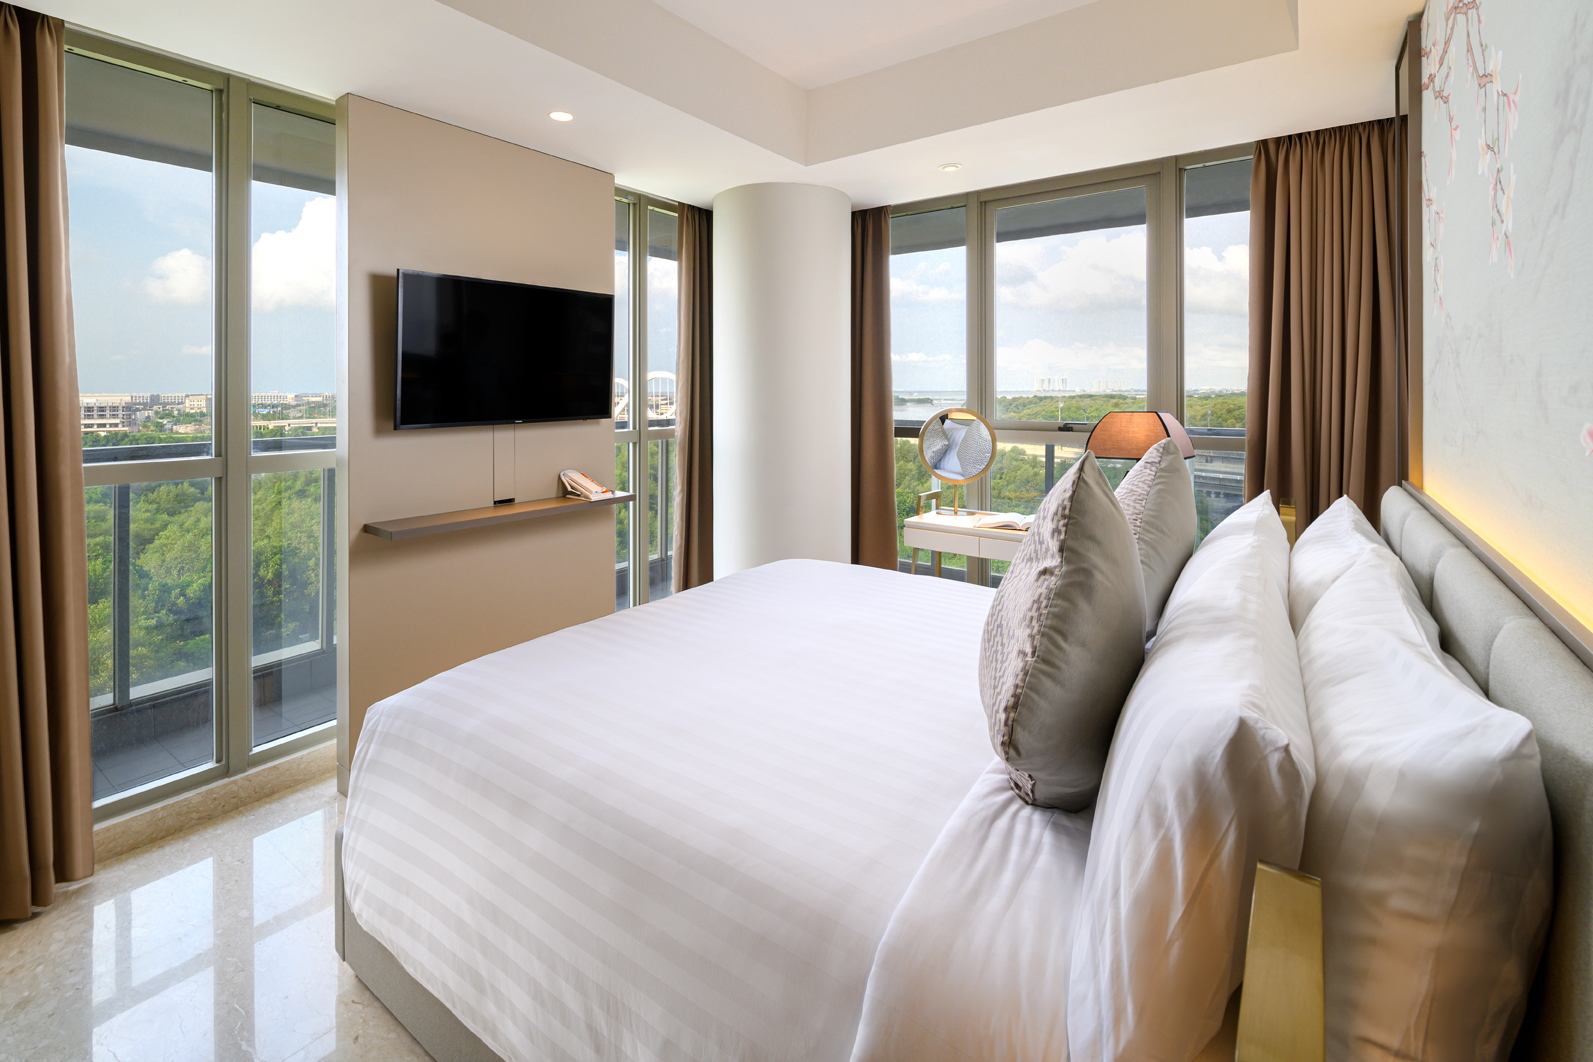 Oakwood has opened its third property in Jakarta, Indonesia. The Oakwood Apartments PIK Jakarta features 151 fully furnished serviced apartments offering city and ocean views. Click to enlarge.